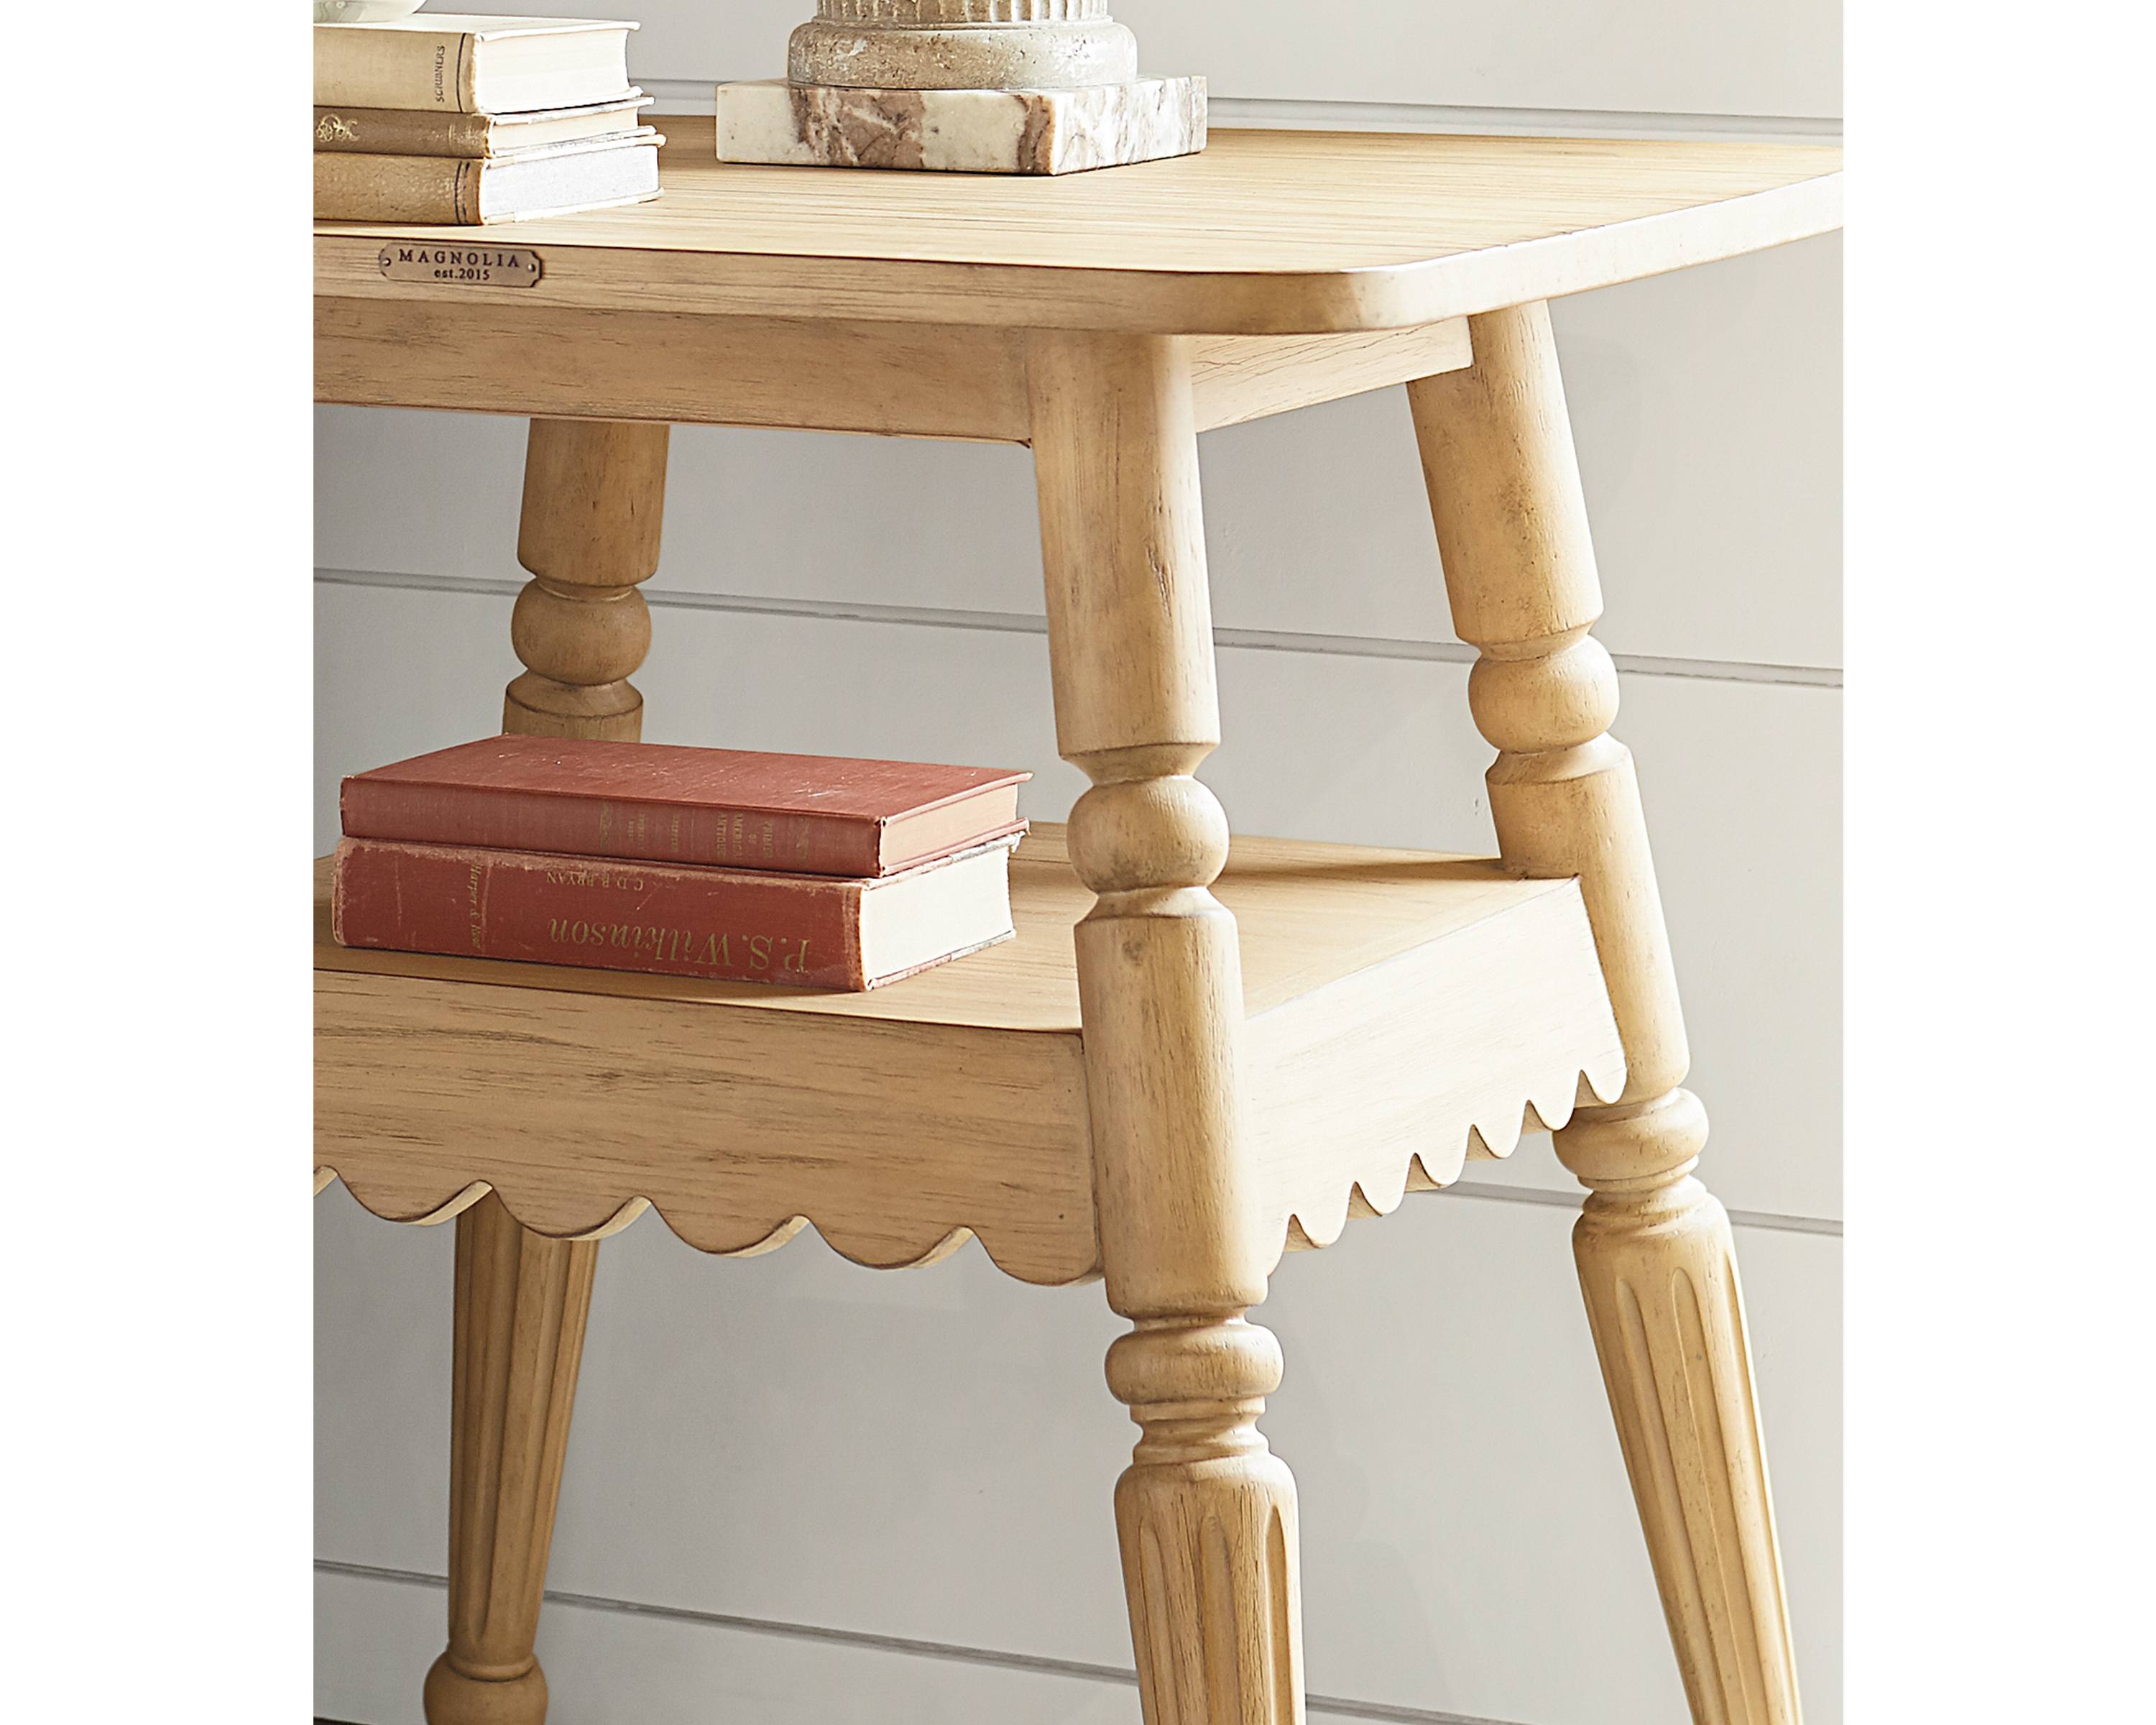 blithe accent table magnolia home frm detail kitchen our quaint wheat tastefully used end the living room well bedside its smooth round corners and cherry coffee with storage gold